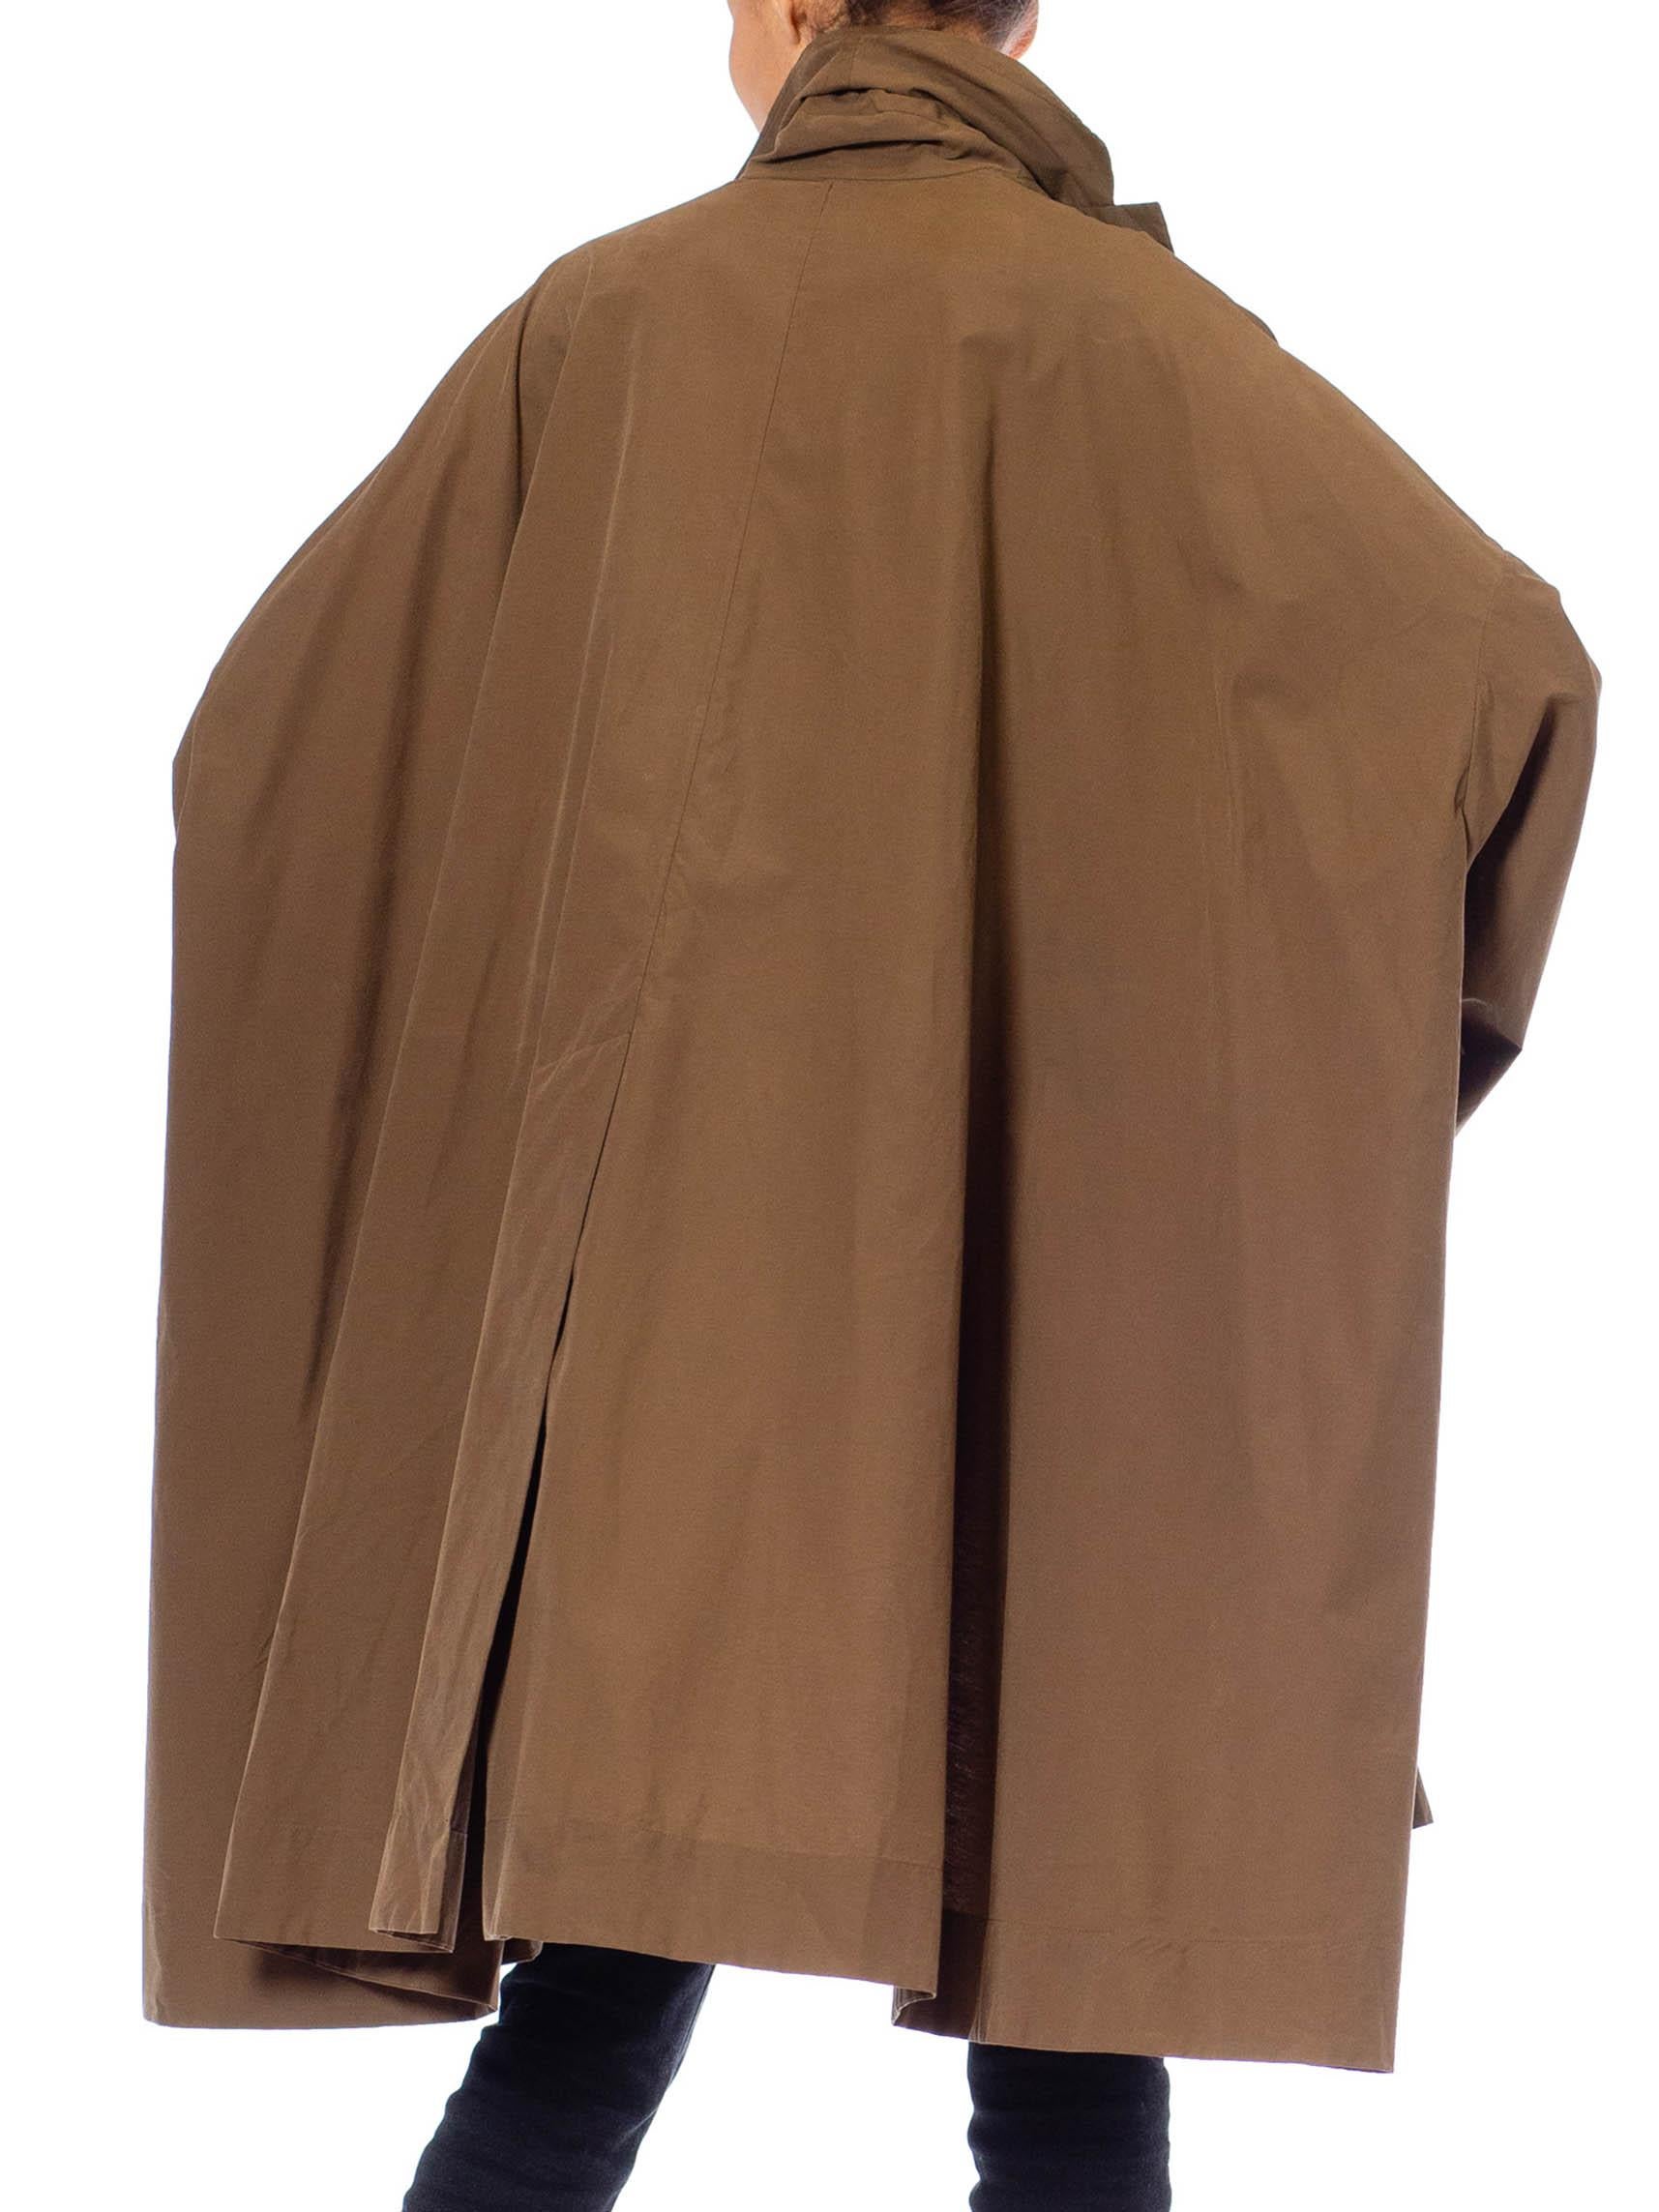 Women's 1990S ROMEO GIGLI Camel Brown Cotton Swing Back Trench Coat With Belt For Sale